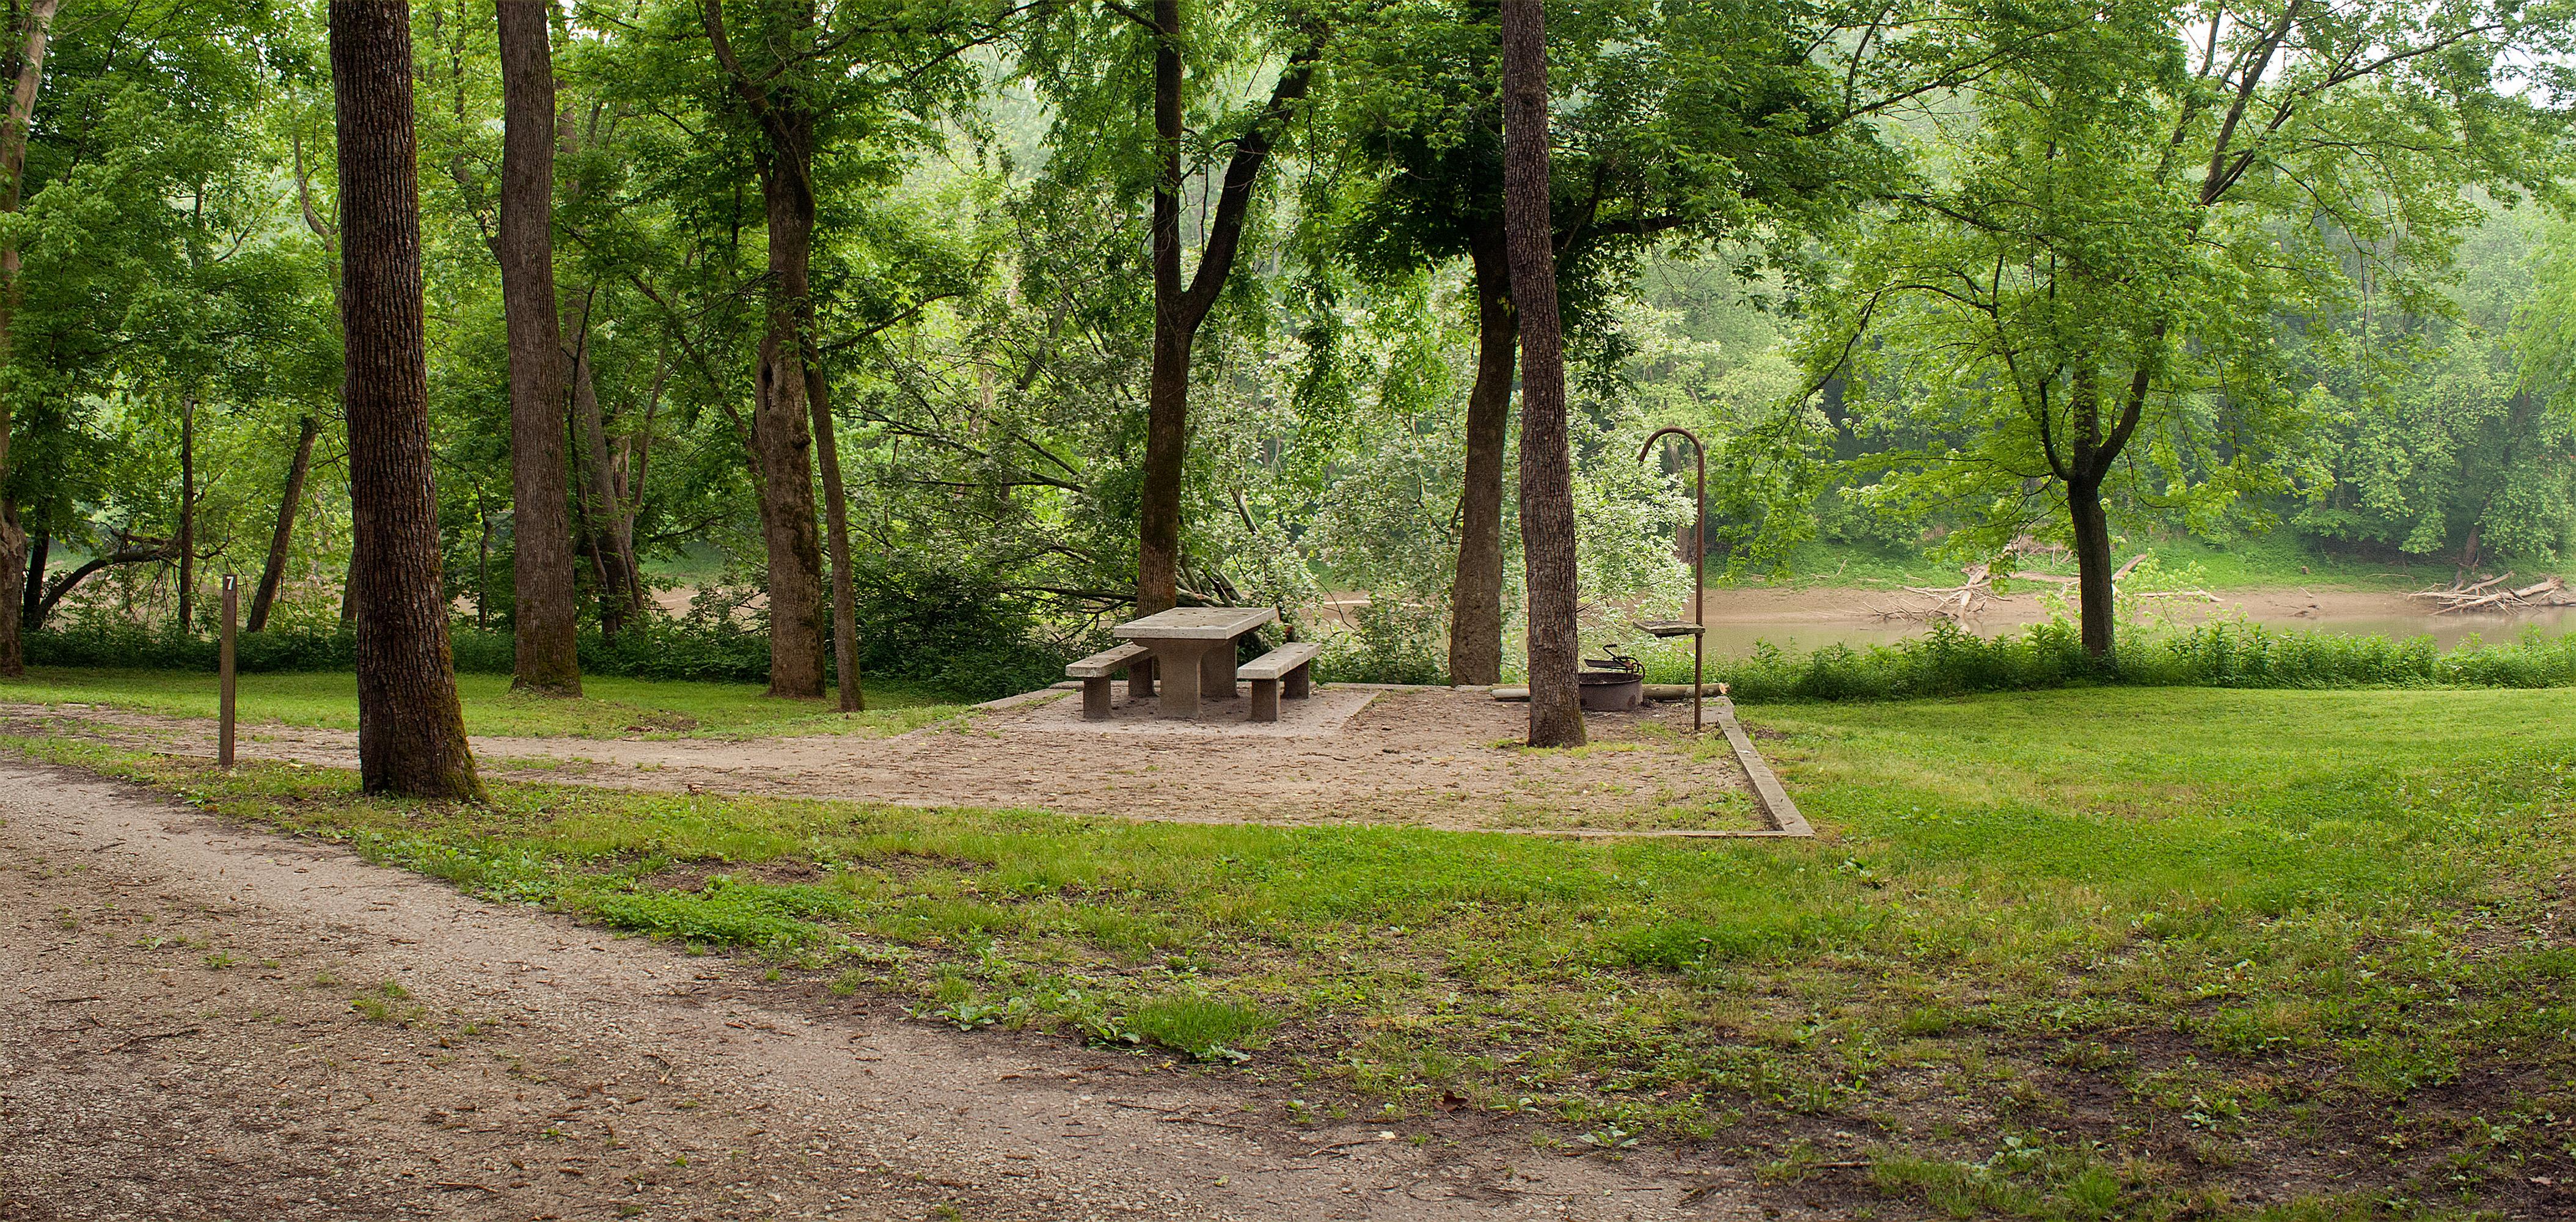 An unoccupied campsite with concrete picnic table, fire ring and lantern hook.